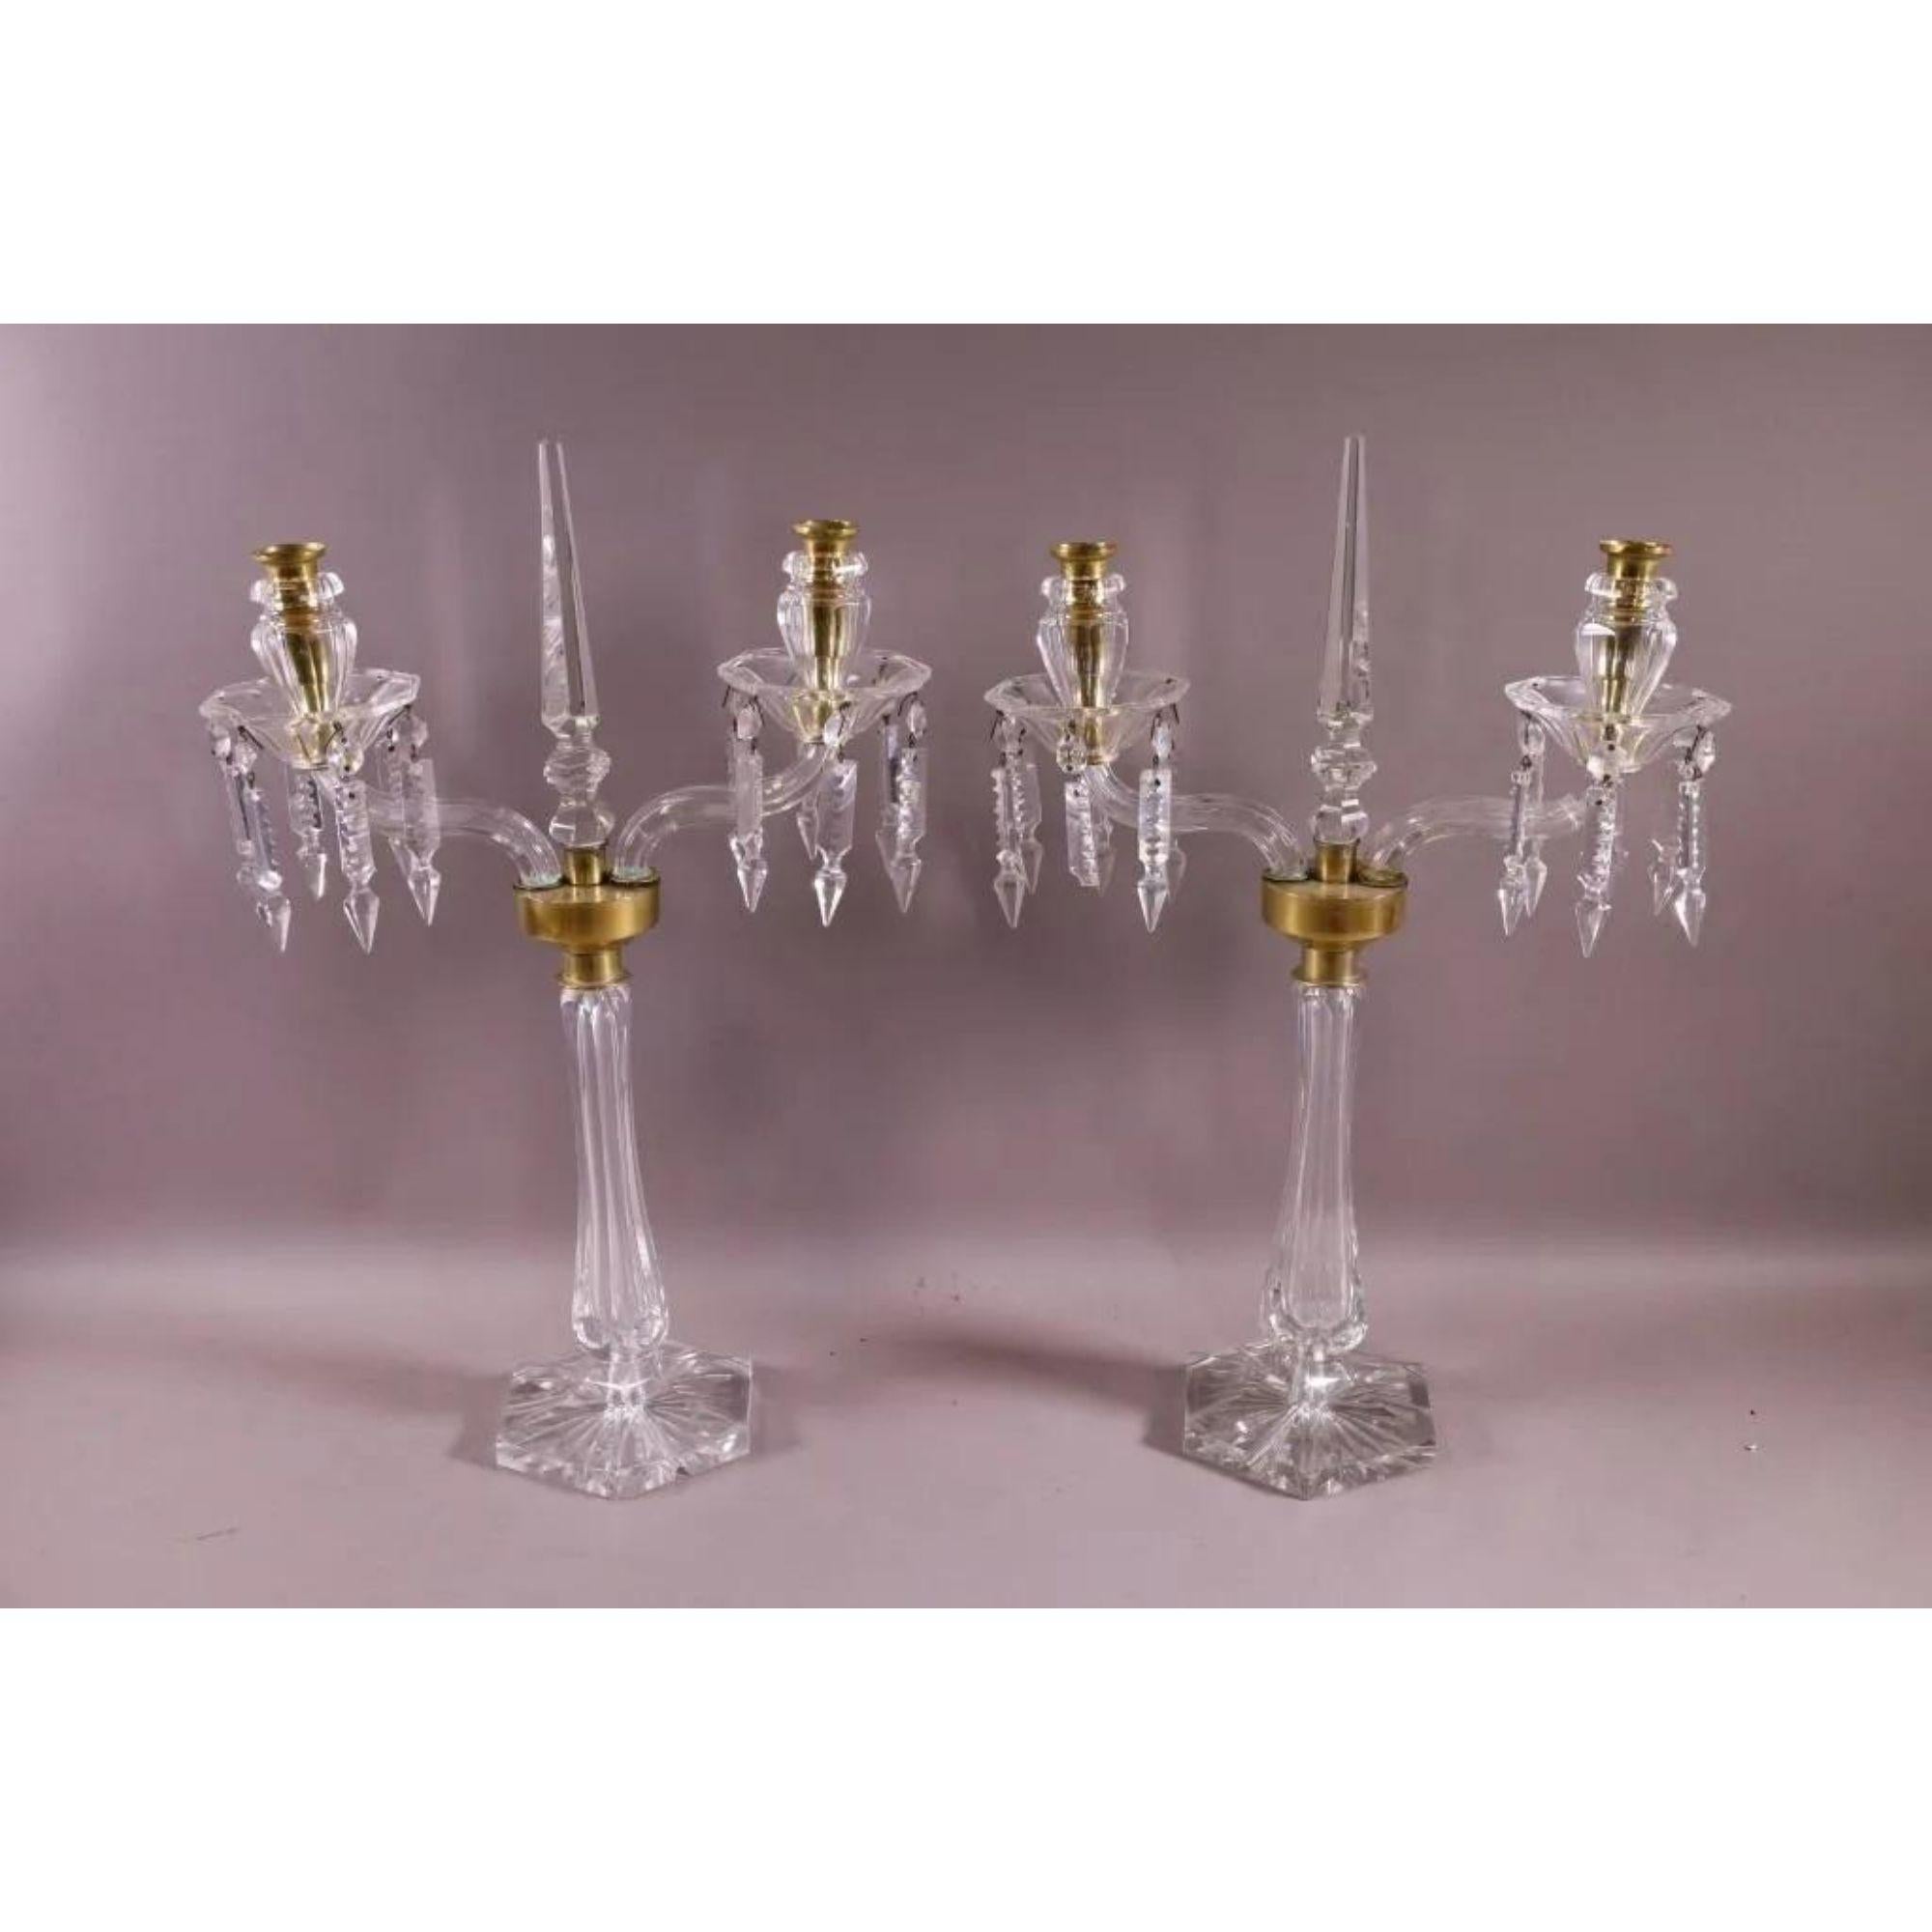 Pair of antique Austrian crystal candelabra. Each features a central obelisk mounted in bronze with two lights flanked by prism crystals.

Additional information: 
Materials: Crystal.
Color: Transparent.
Brand: Moser Glassworks.
Period: